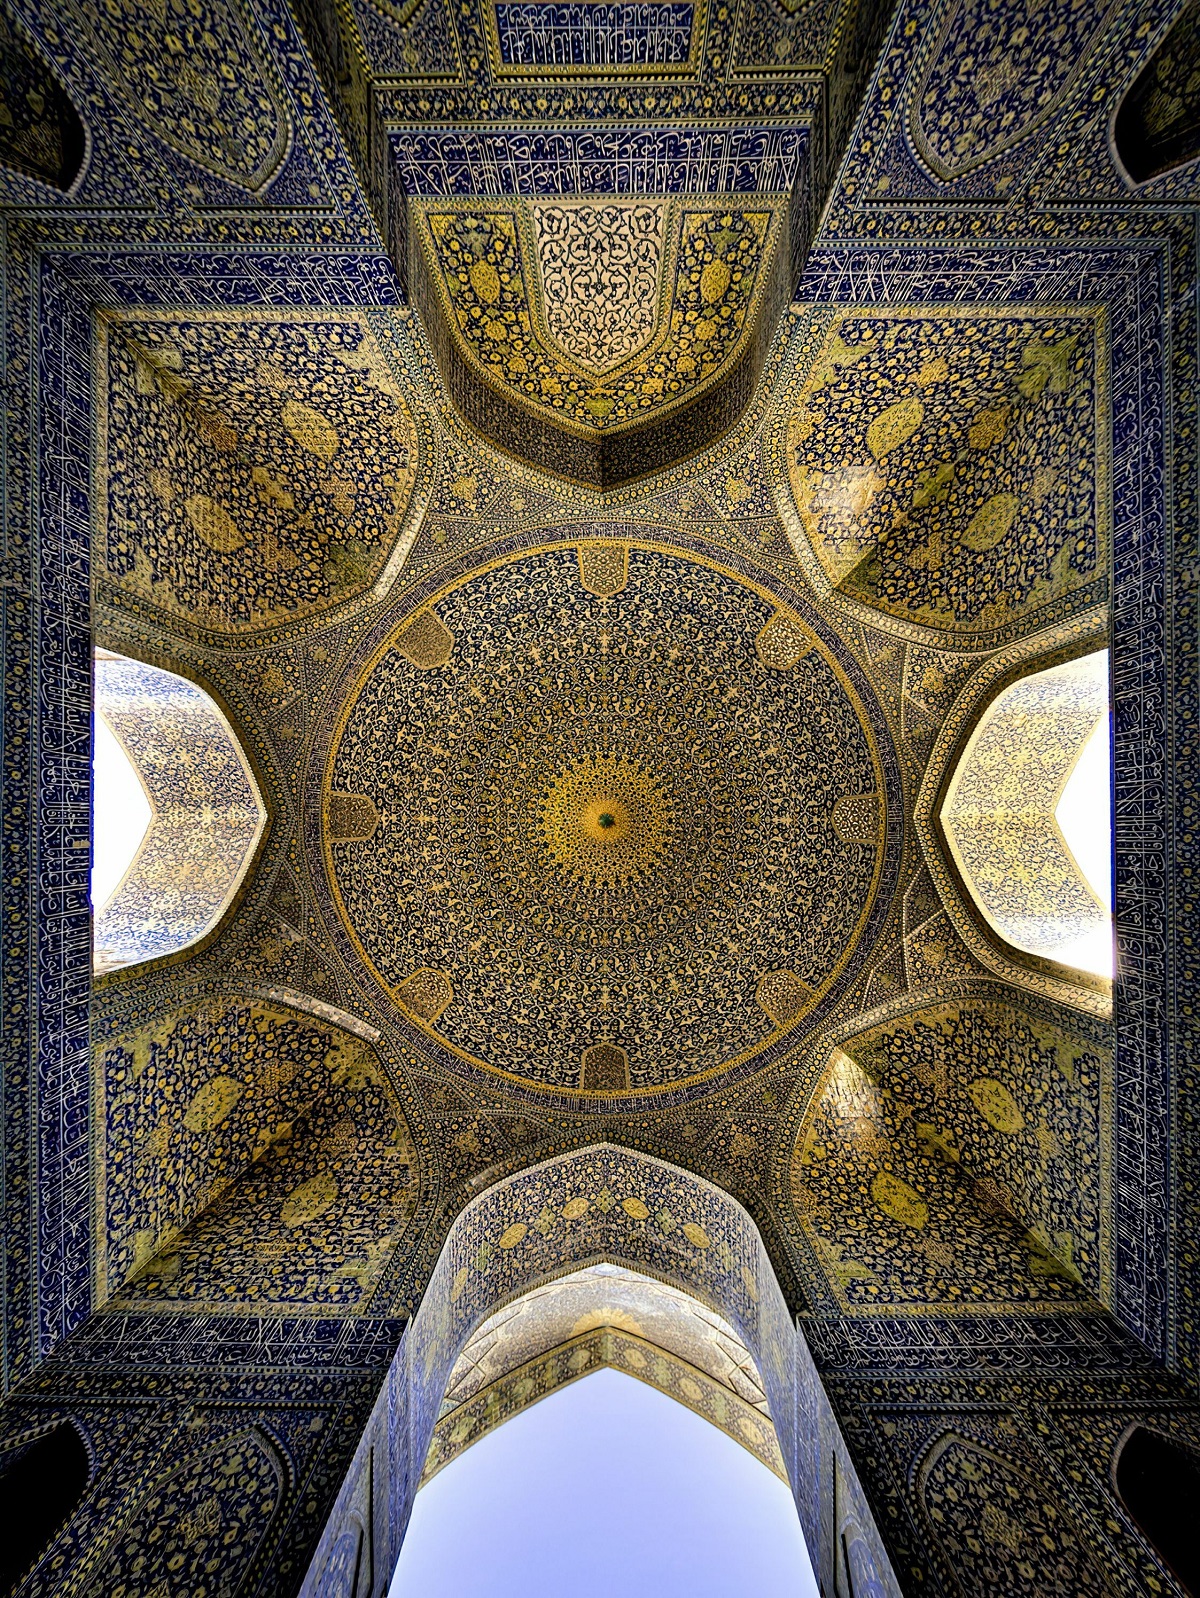 The Ceiling Of The Shah Mosque In Isfahan, Iran